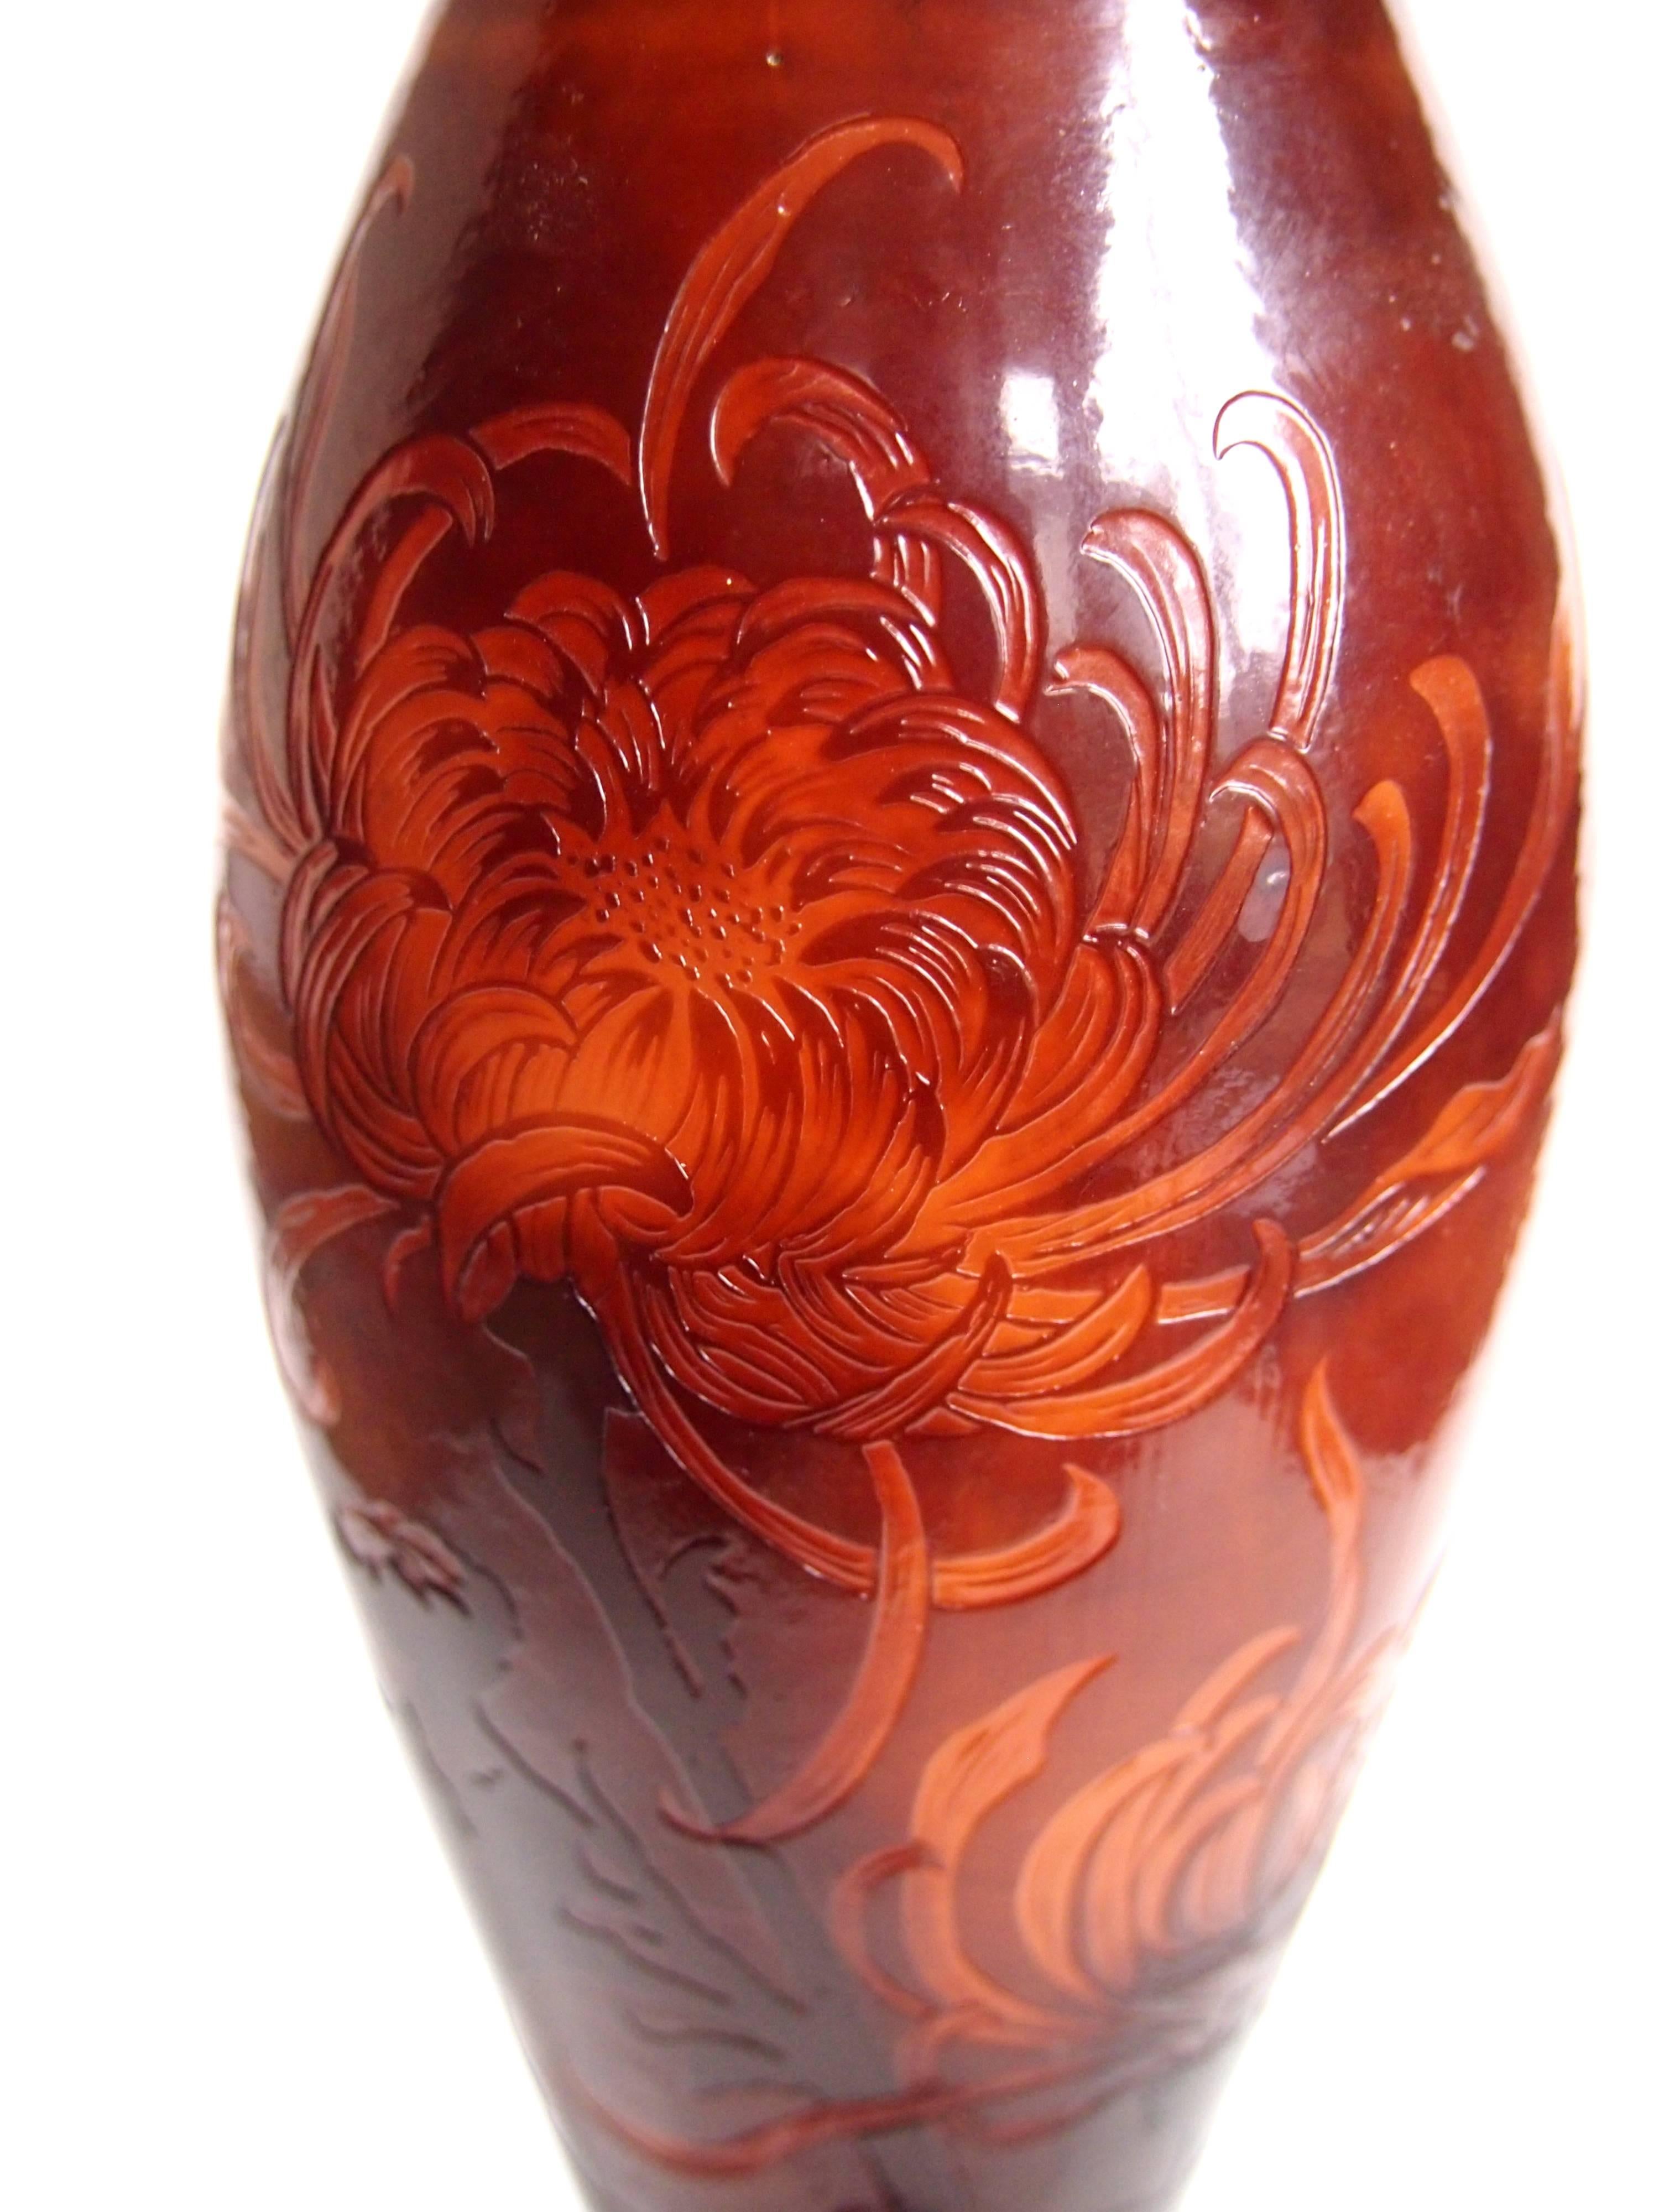 A very rare Emile Galle cameo vase in brown over green/yellow possibly an experimental piece. Usually with cameo the image is created by removing the surrounding glass with acid, but with this vase the acid has been used to intaglio cut a beautiful